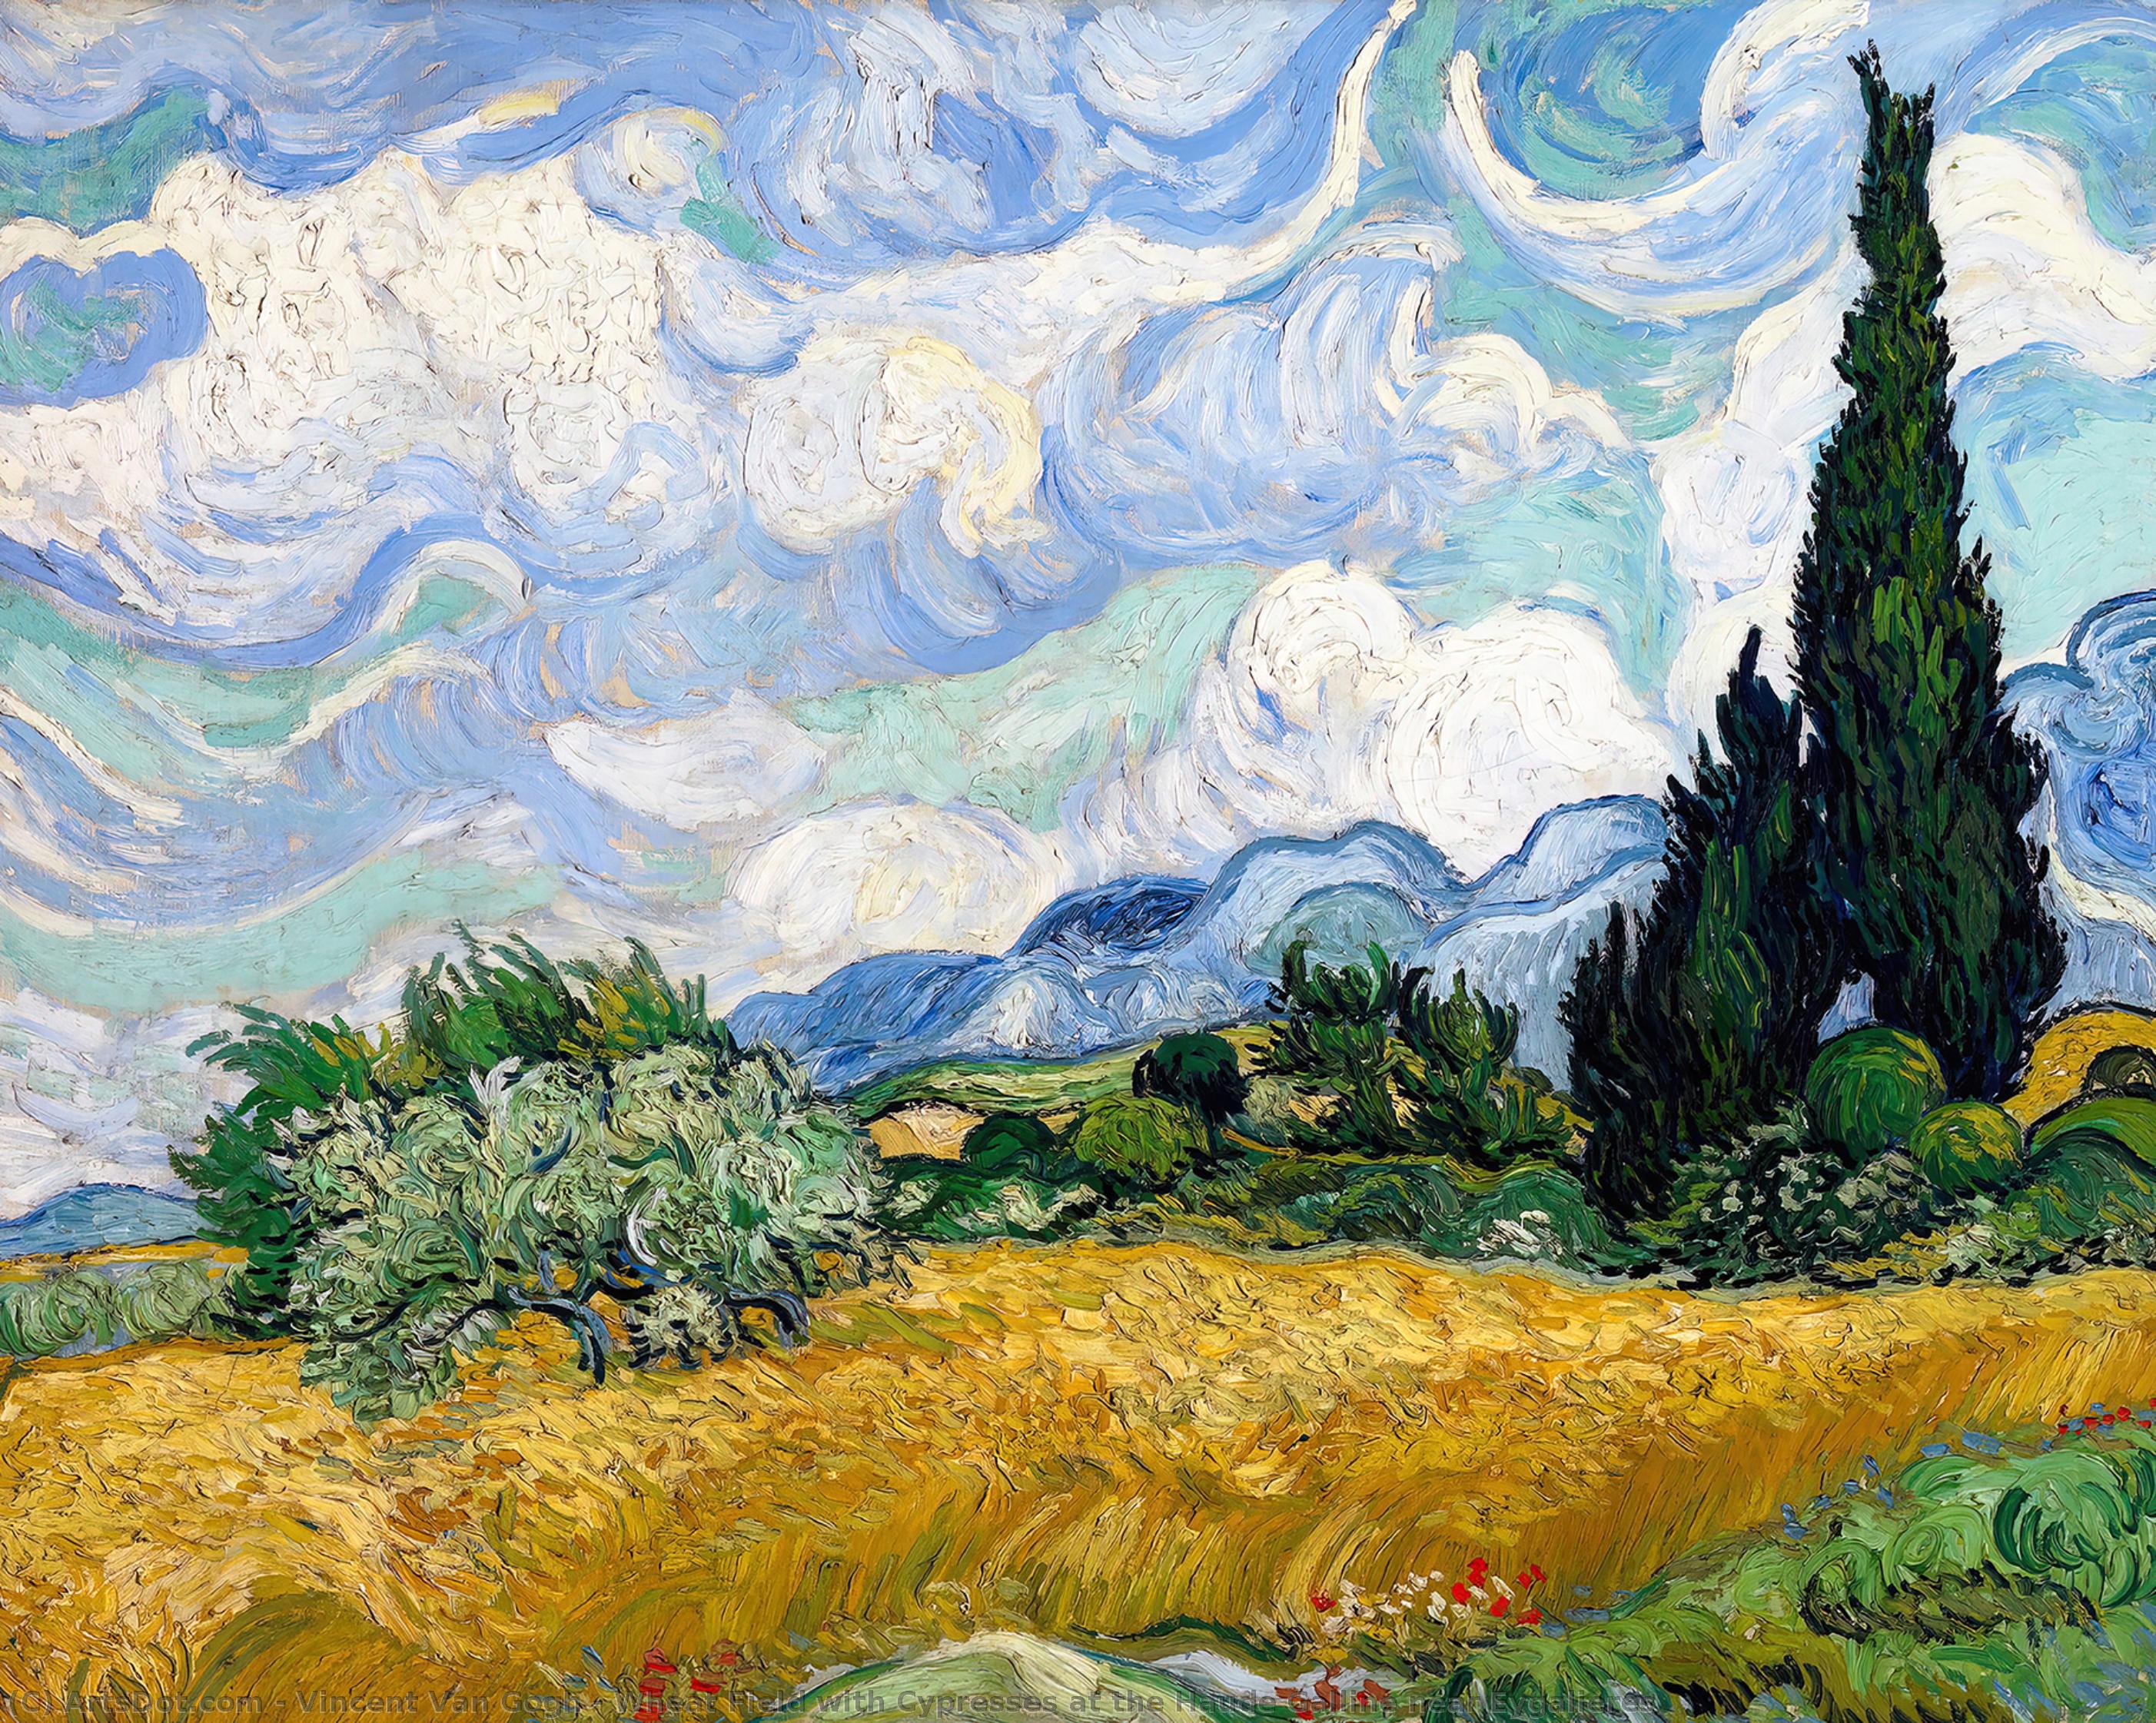 WikiOO.org - 백과 사전 - 회화, 삽화 Vincent Van Gogh - Wheat Field with Cypresses at the Haude Galline near Eygalieres